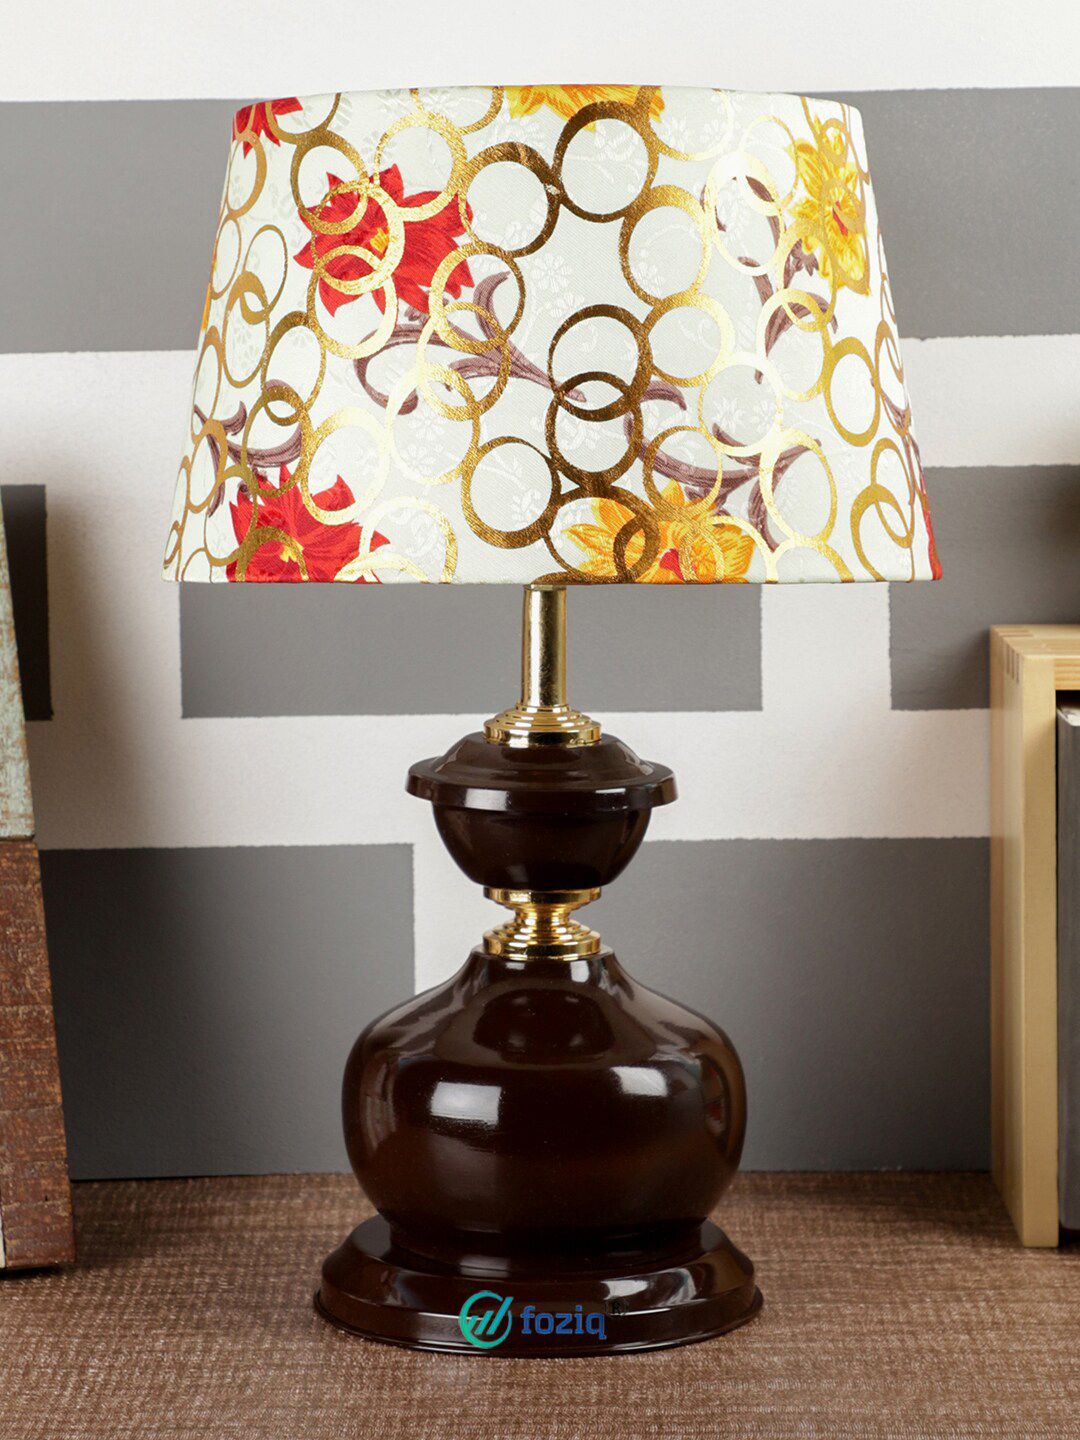 foziq Brown & White Printed Country Table Lamps Price in India